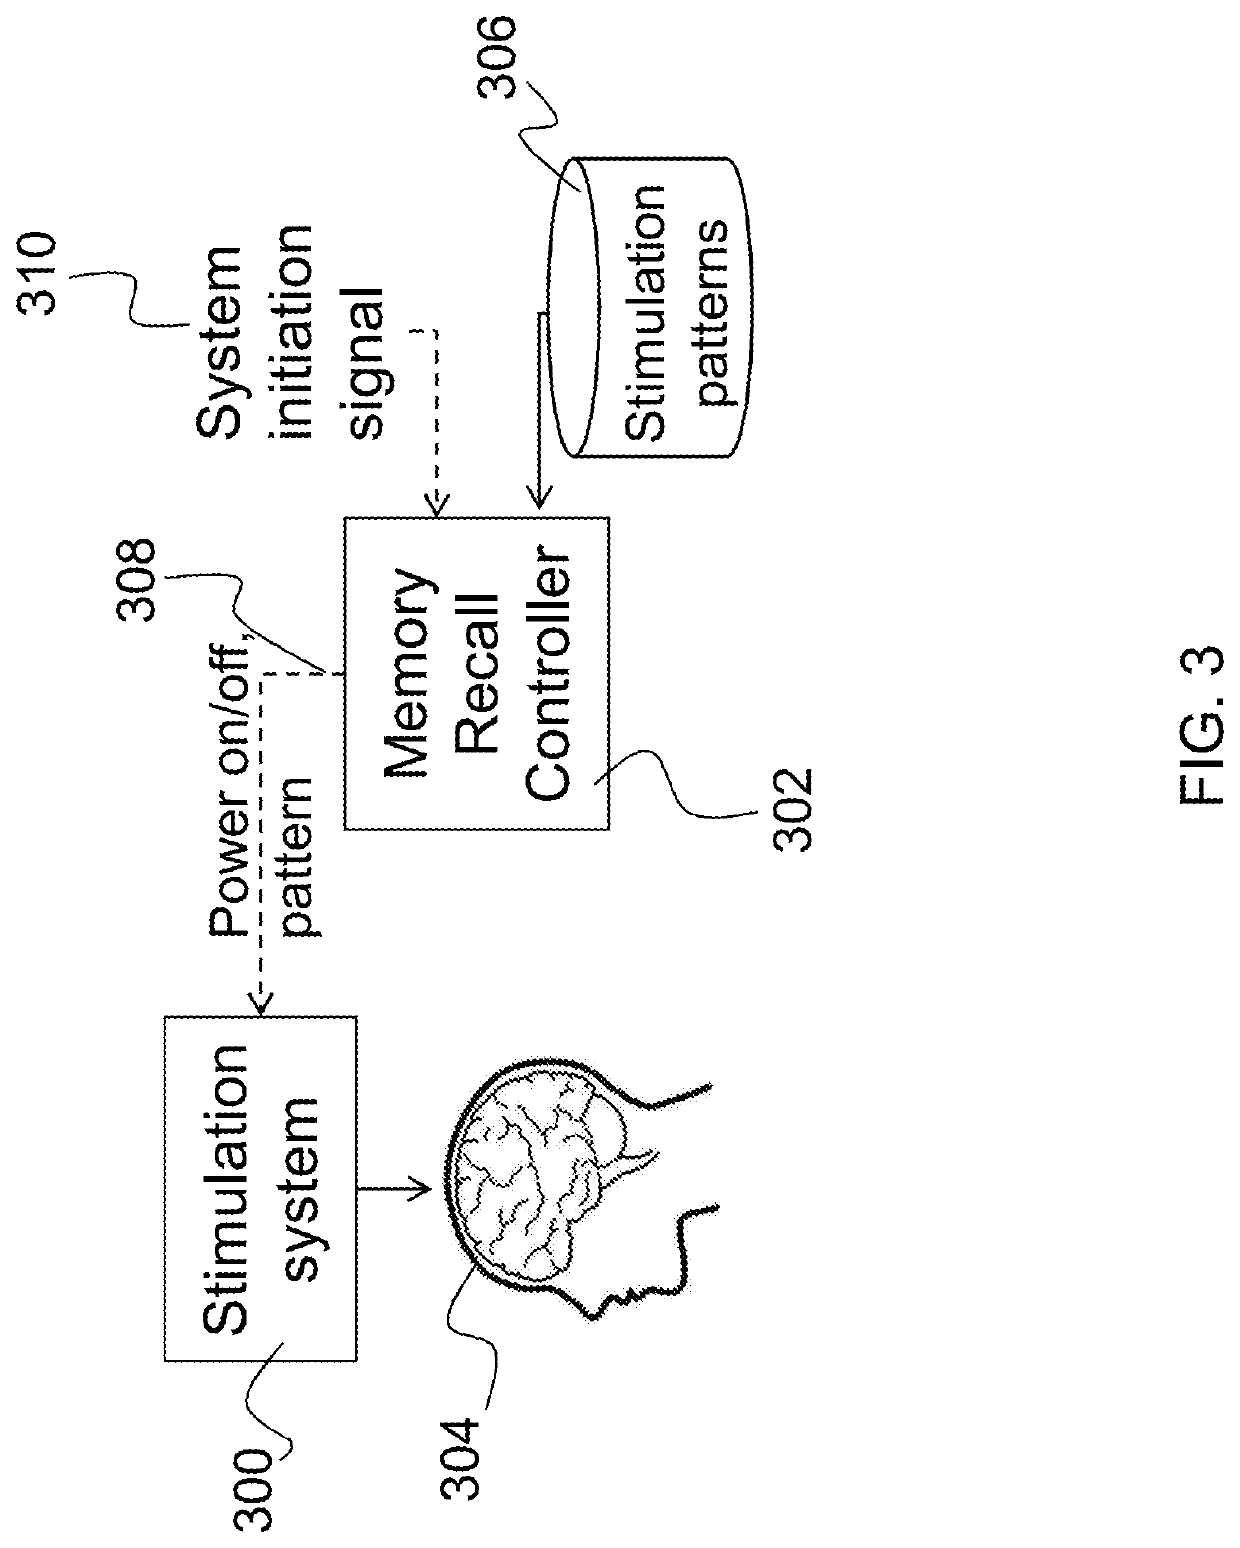 System and method to cue specific memory recalls while awake